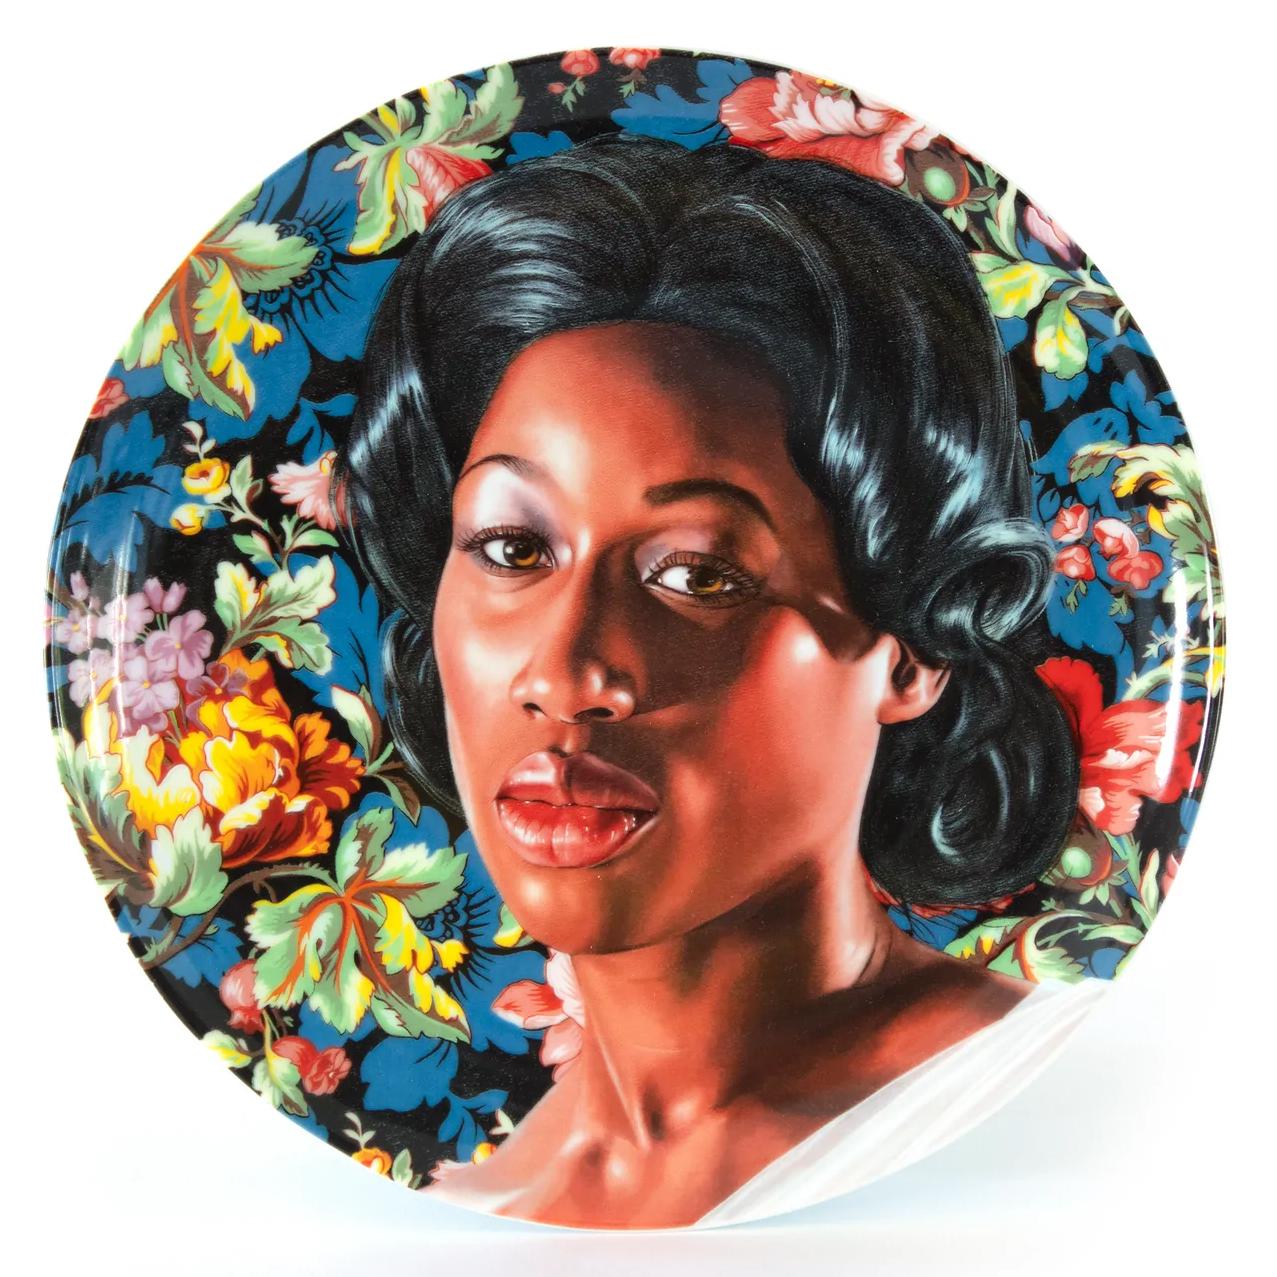 Kehinde Wiley's collection of six porcelain coupe plates is one of our best-selling editions. Made in direct collaboration with the artist, the collection features details from paintings spanning 2008-2012. Each of the six images - 3 male and 3